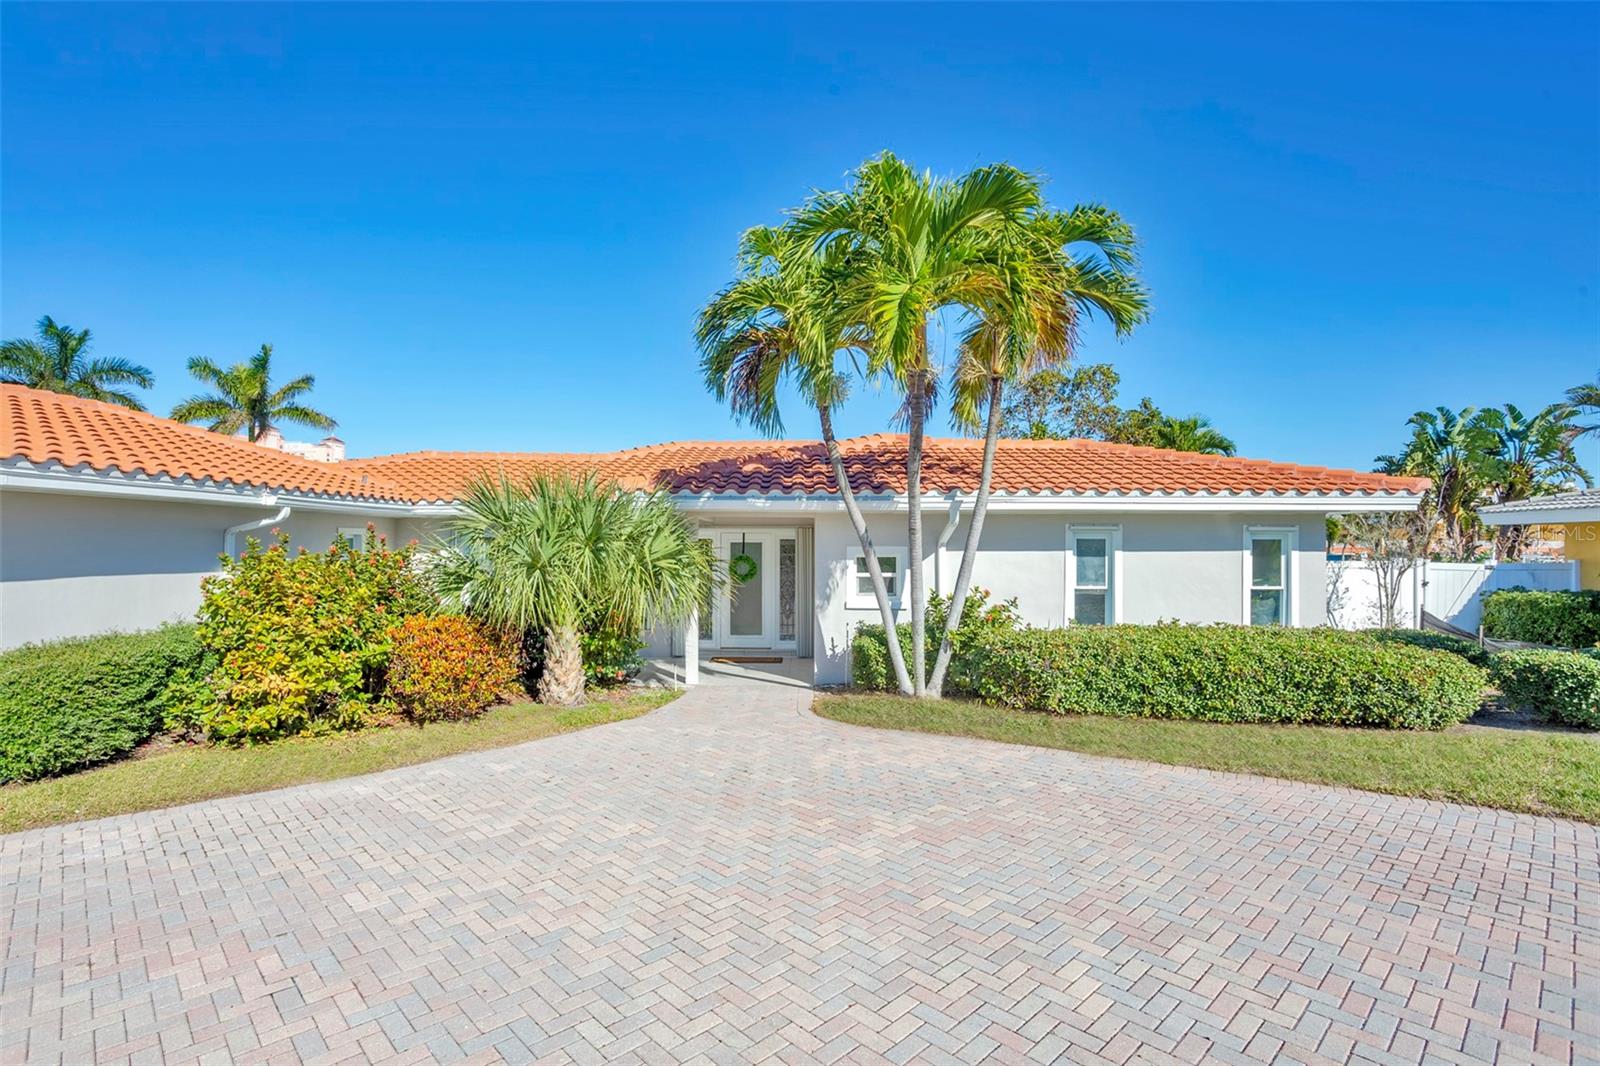 For sale: 136 BAYSIDE DRIVE, CLEARWATER BEACH FL 33767, CLEARWATER BEACH, FL